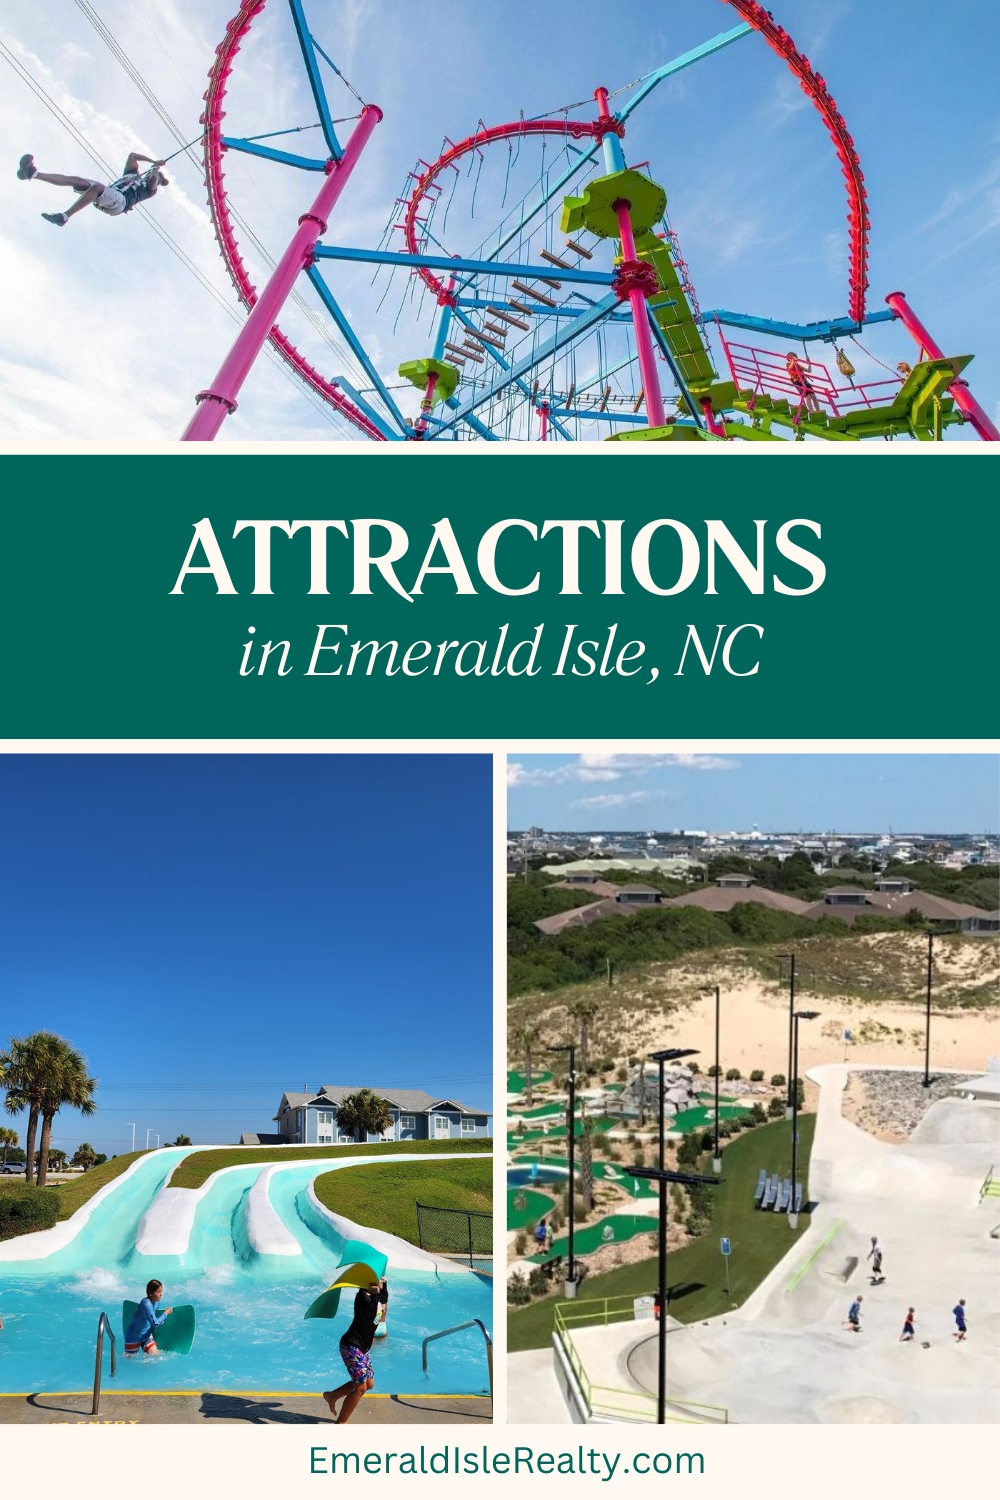 Attractions in Emerald Isle, NC